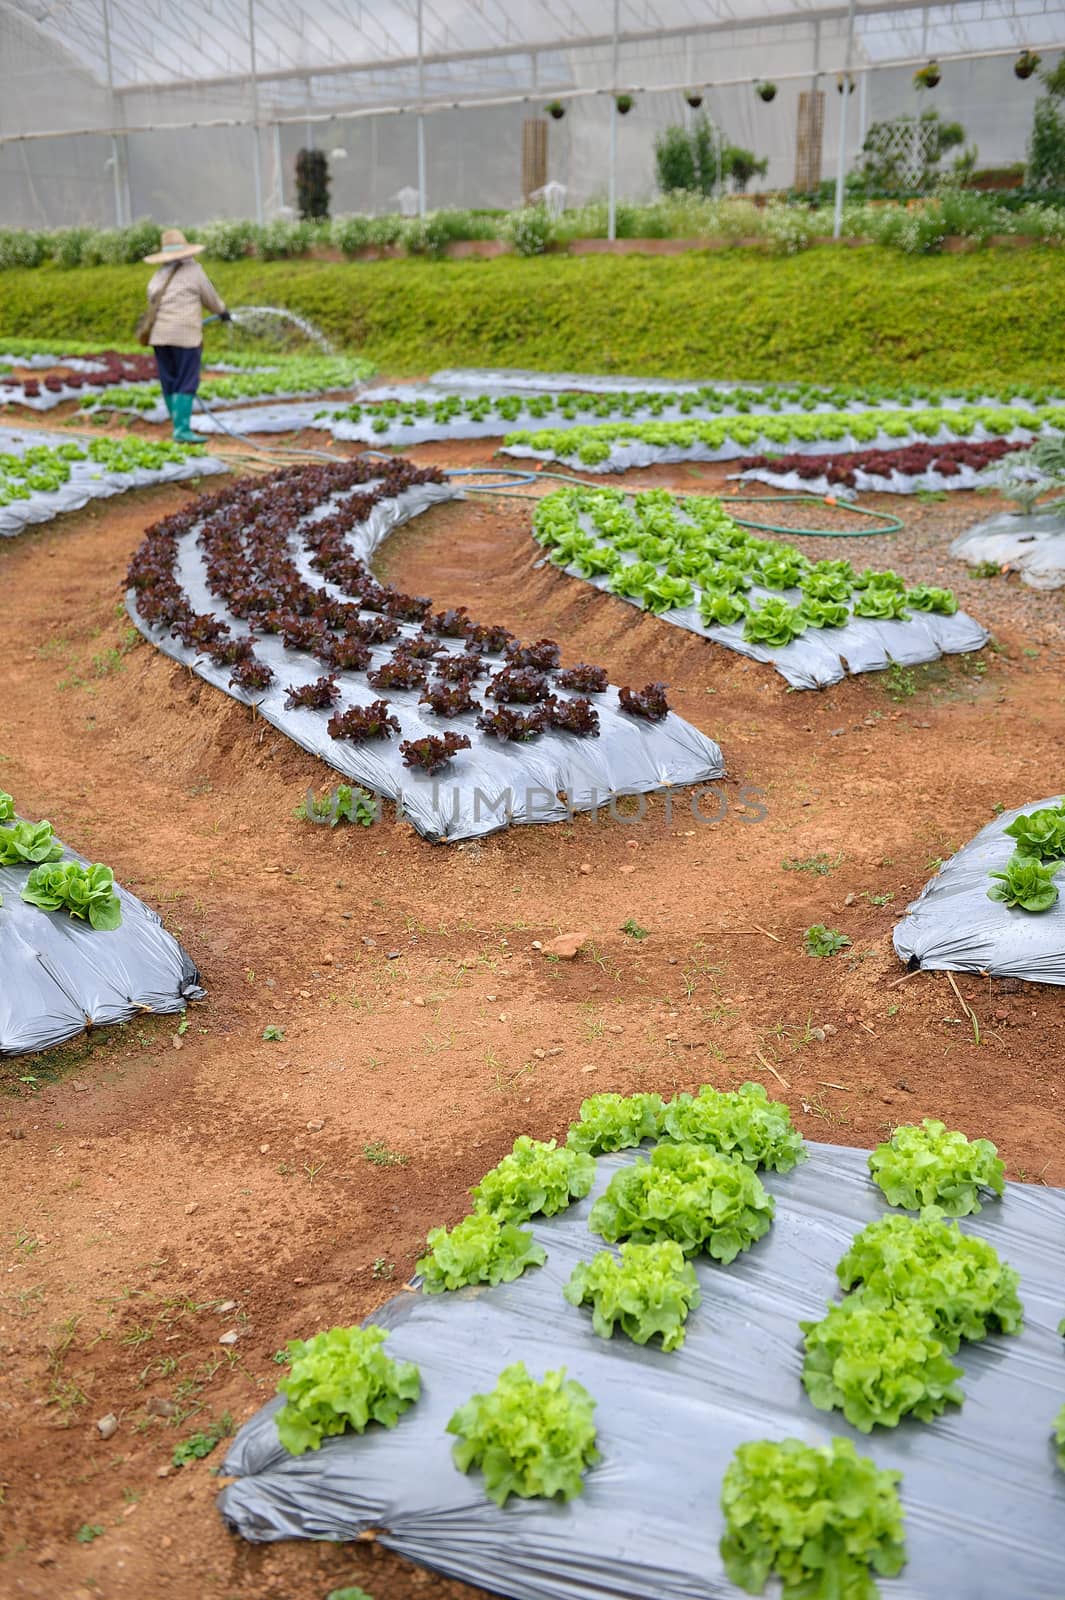 worker in veggie plot at Doi Angkhang royal project, Chiangmai, Thailand.